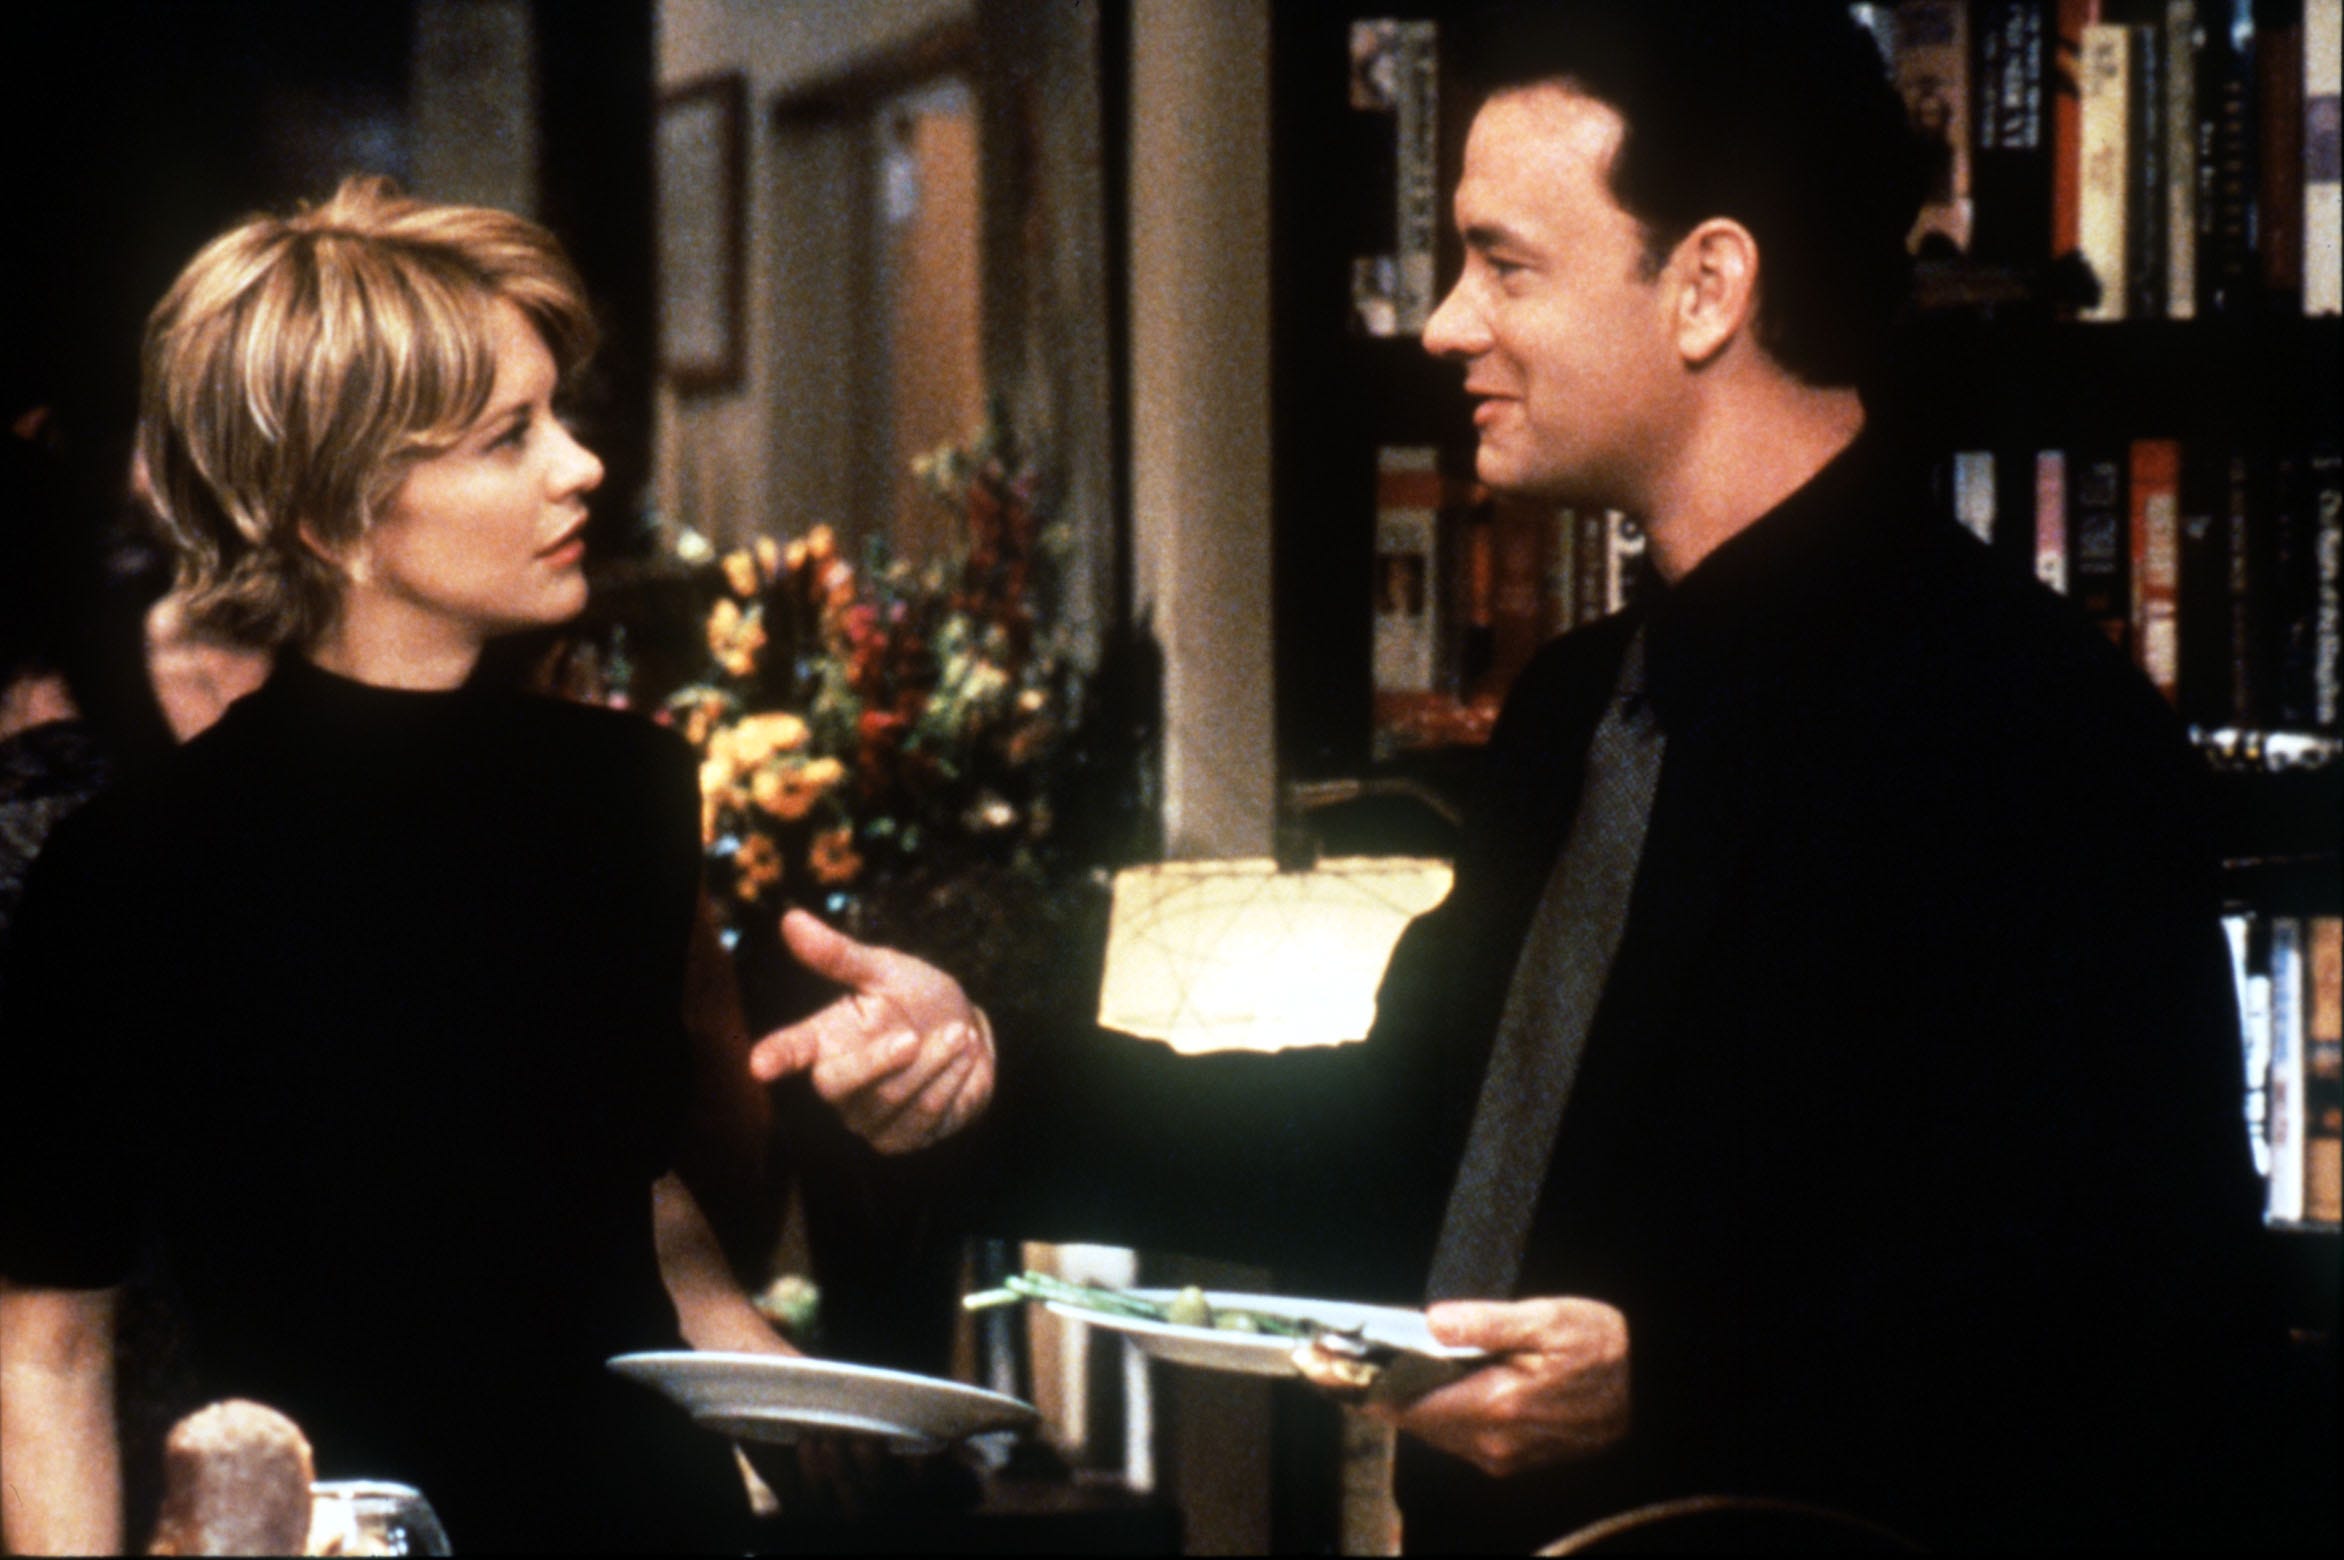 ‘You’ve Got Mail’ turns 20: All the best quotes from the rom-com